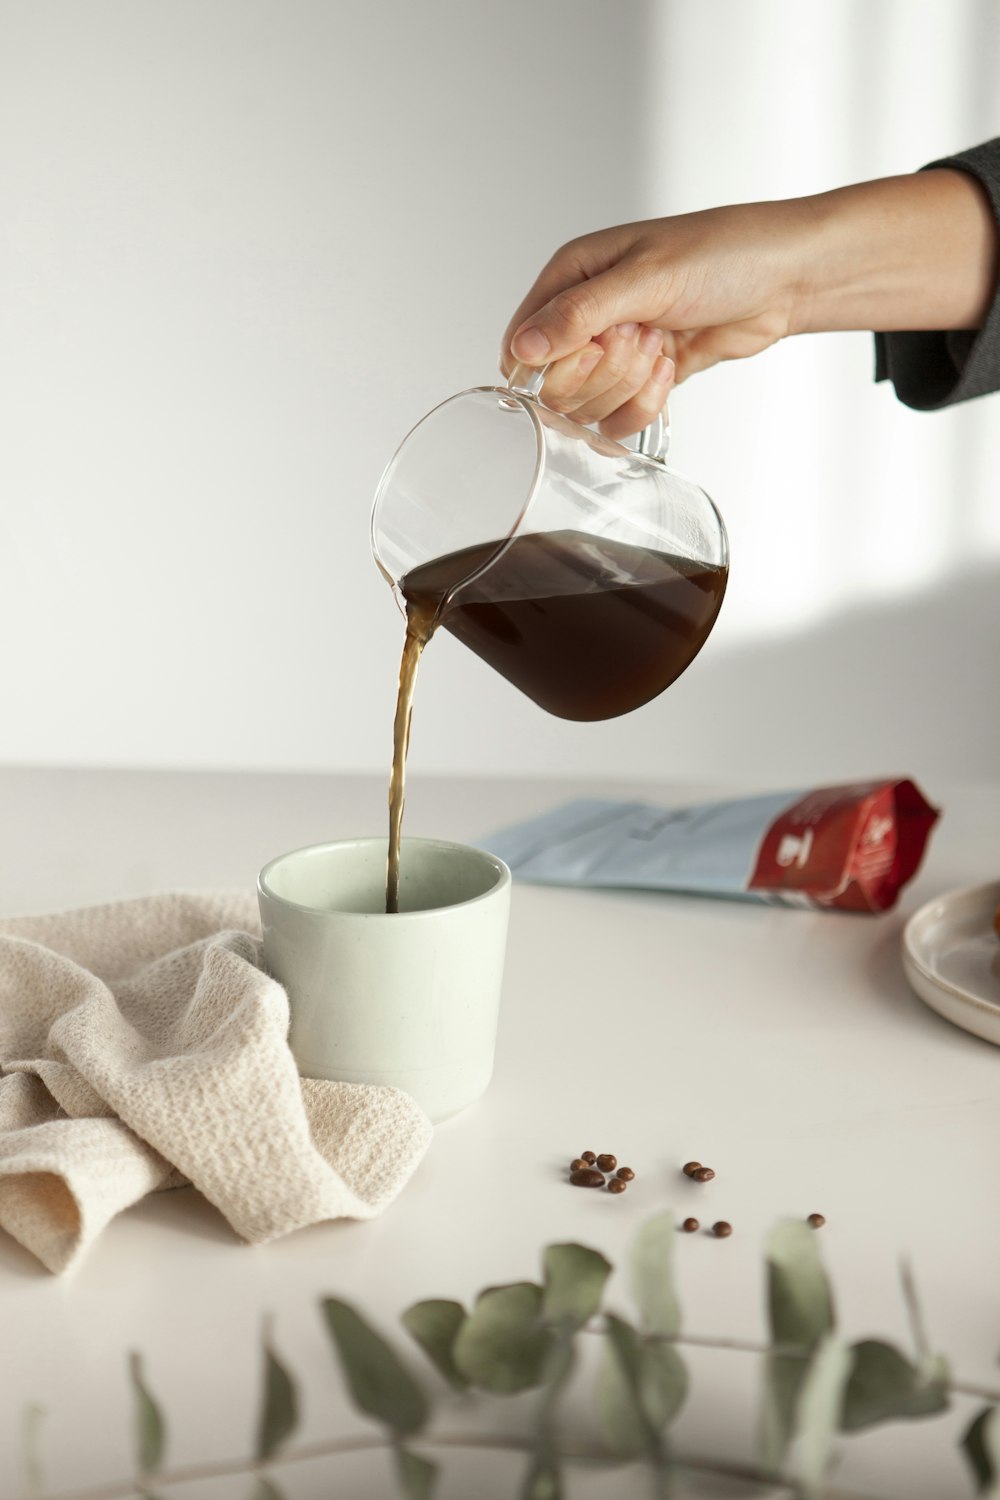 a person pouring coffee into a cup on a table